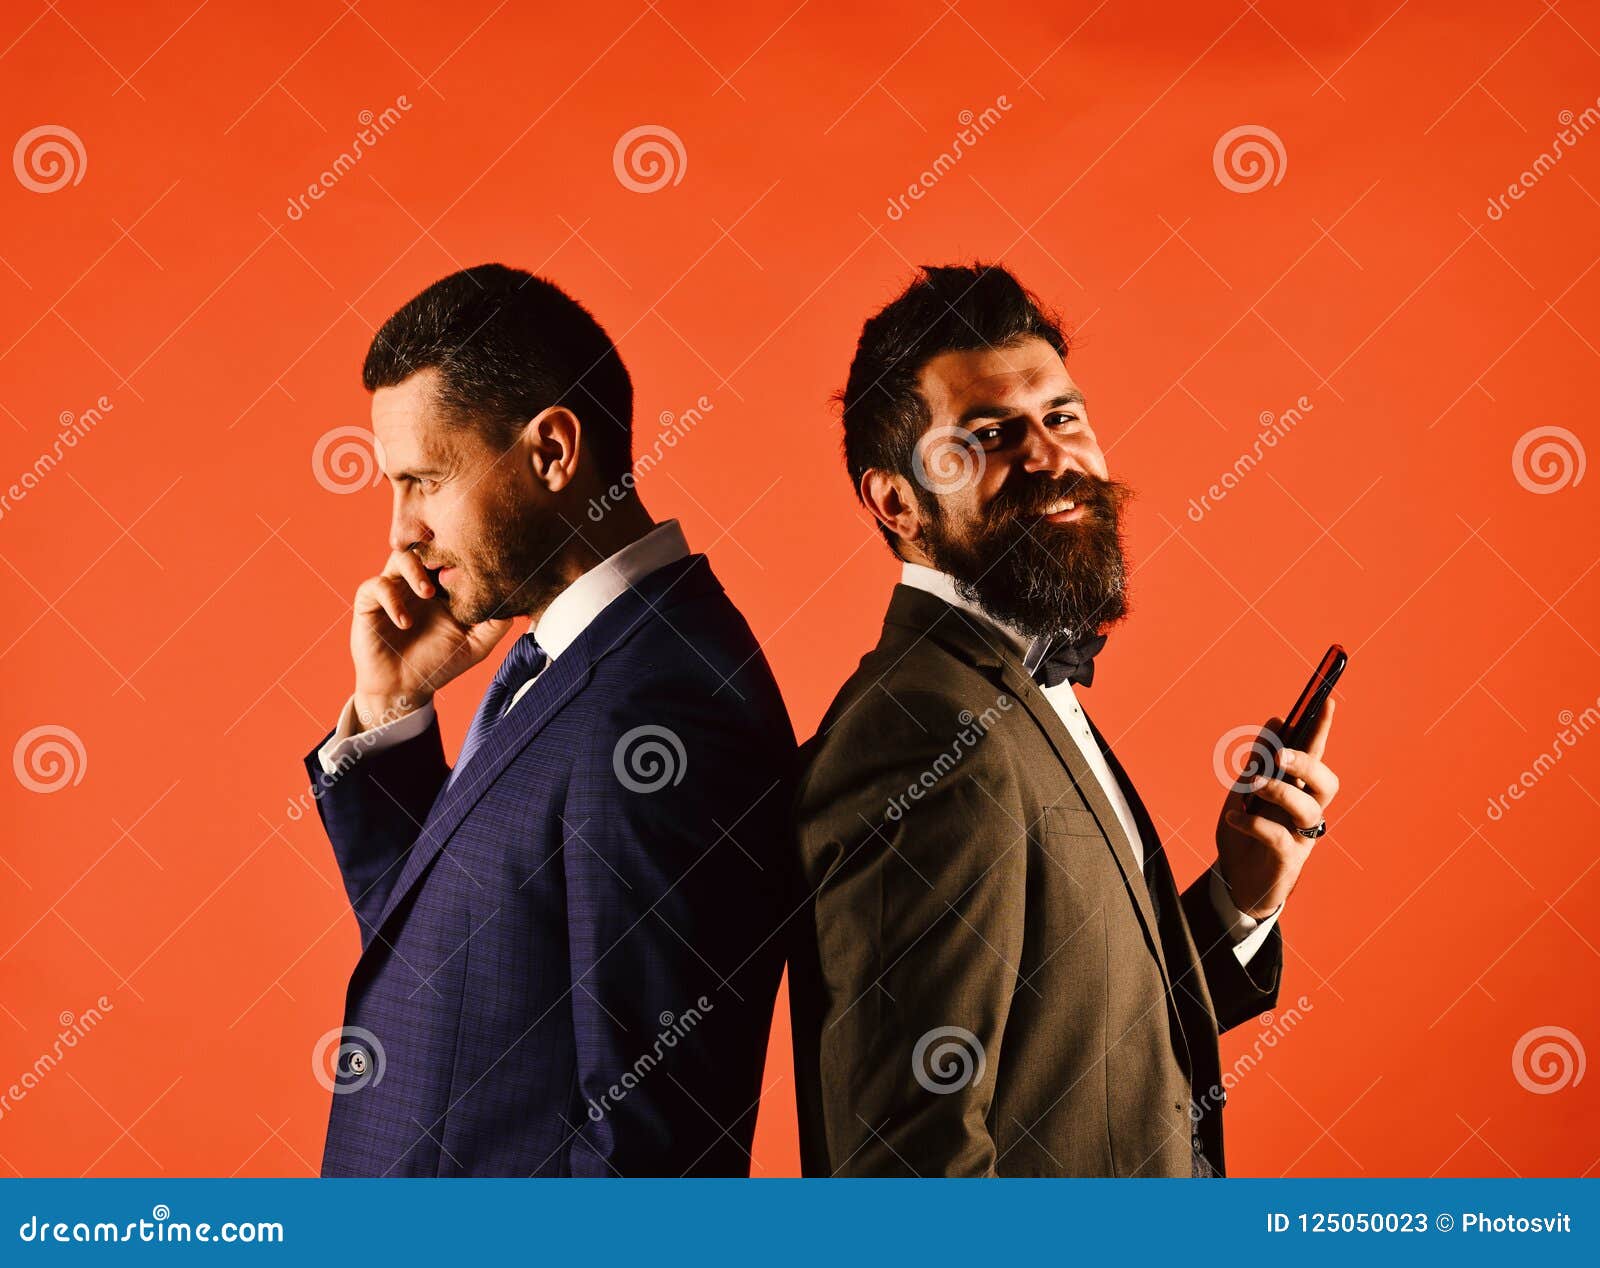 business call. machos in classic suits talk on cell phone.